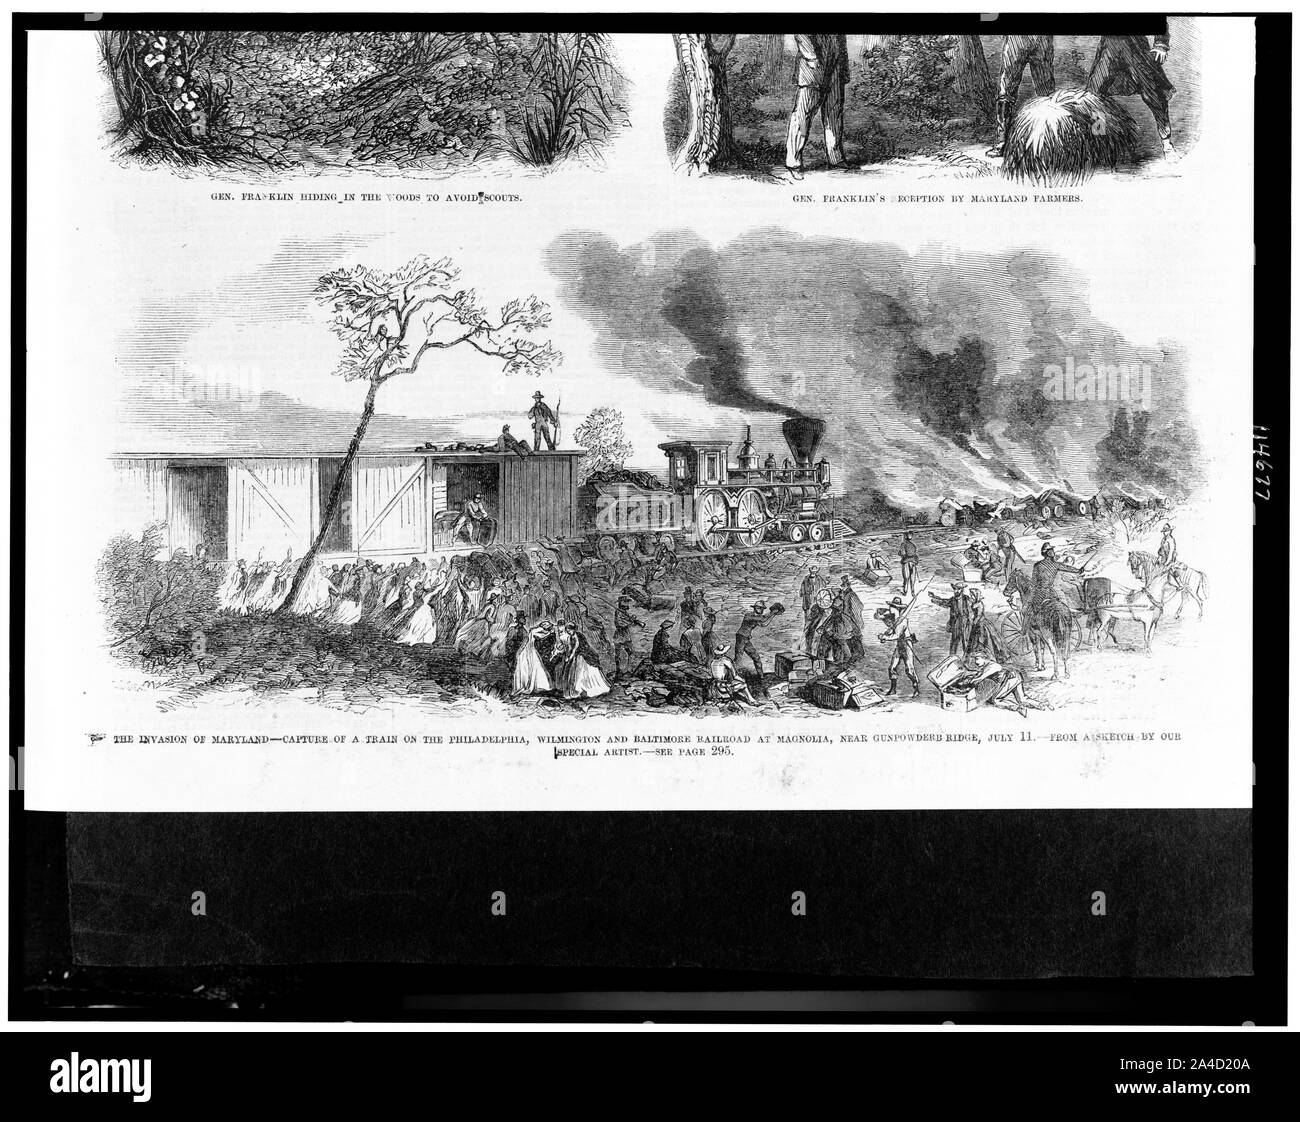 The invasion of Maryland--capture of a train on the Philadelphia, Wilmington and Baltimore Railroad at Magnolia, near Gunpowderb [sic] Ridge, July 11 / from a sketch by our special artist. Stock Photo